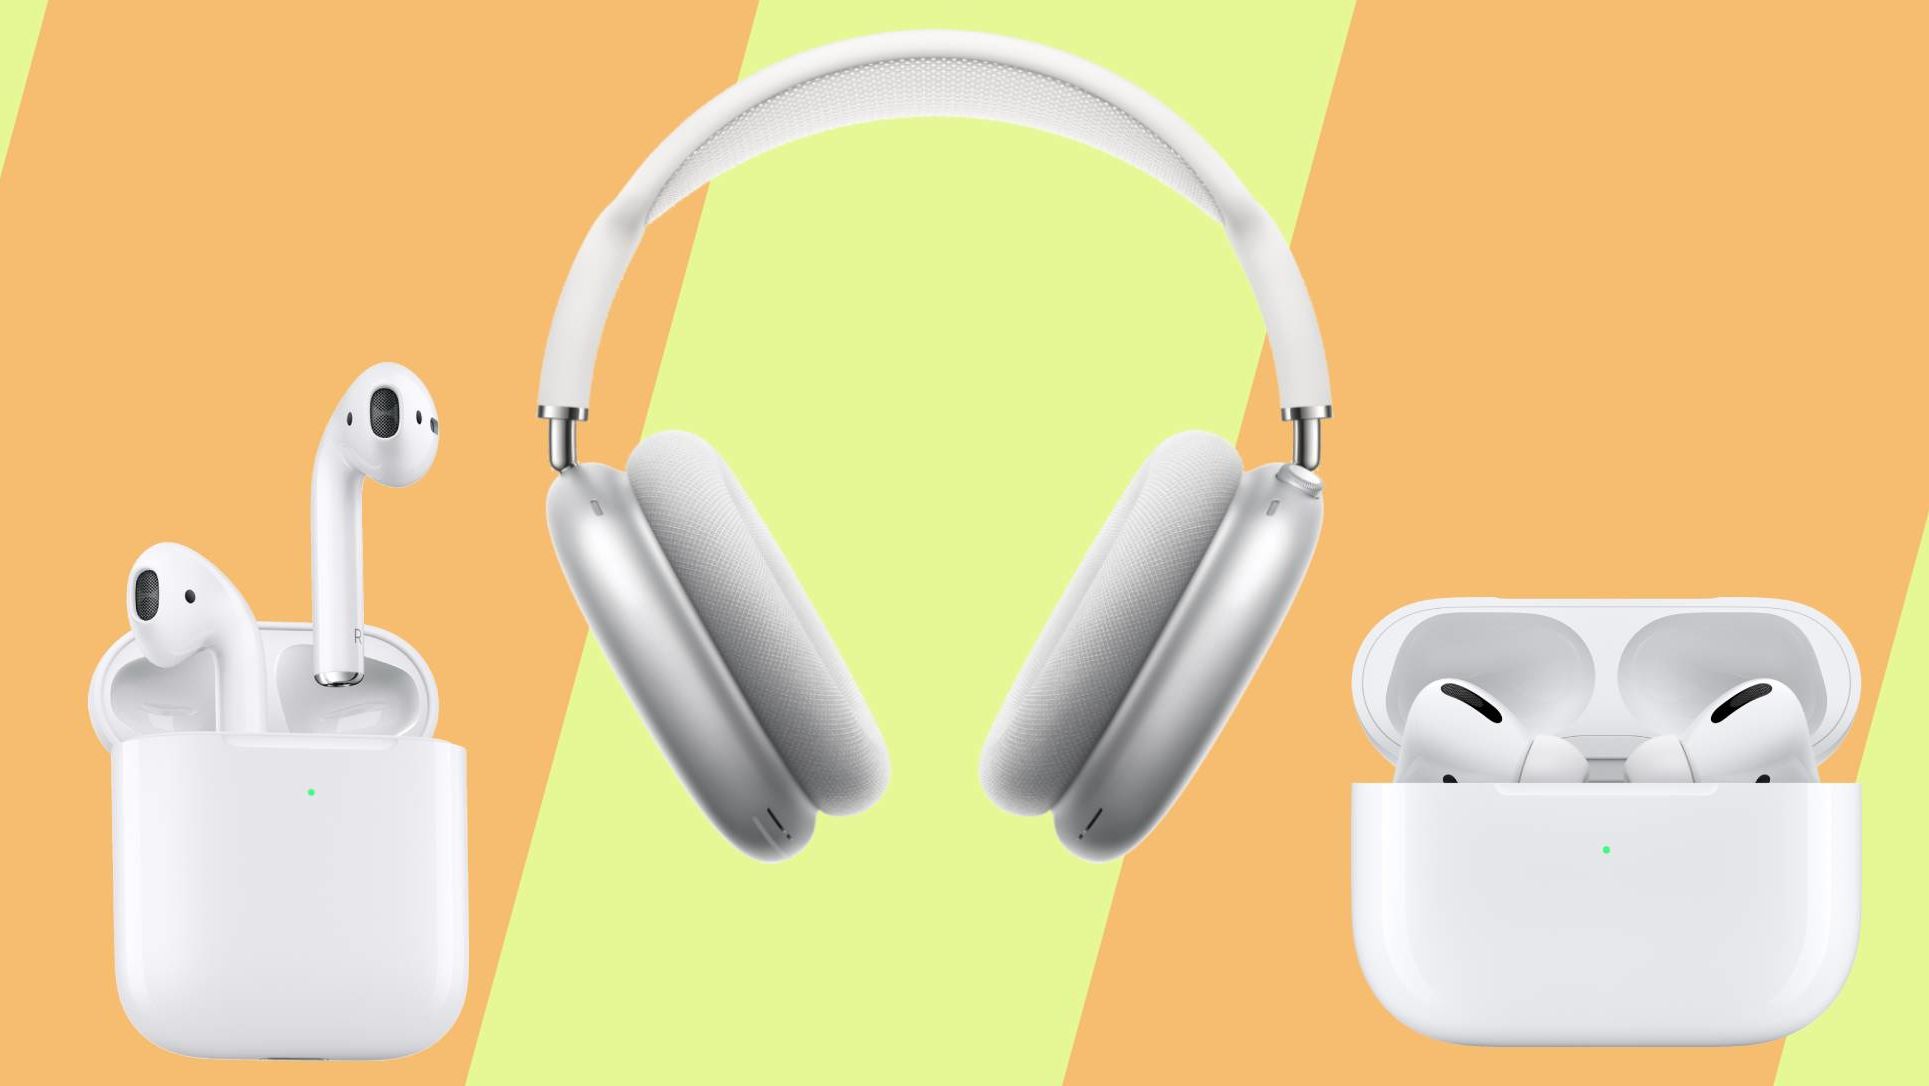 Apple's AirPods are a no-brainer -- if you have the latest iPhone